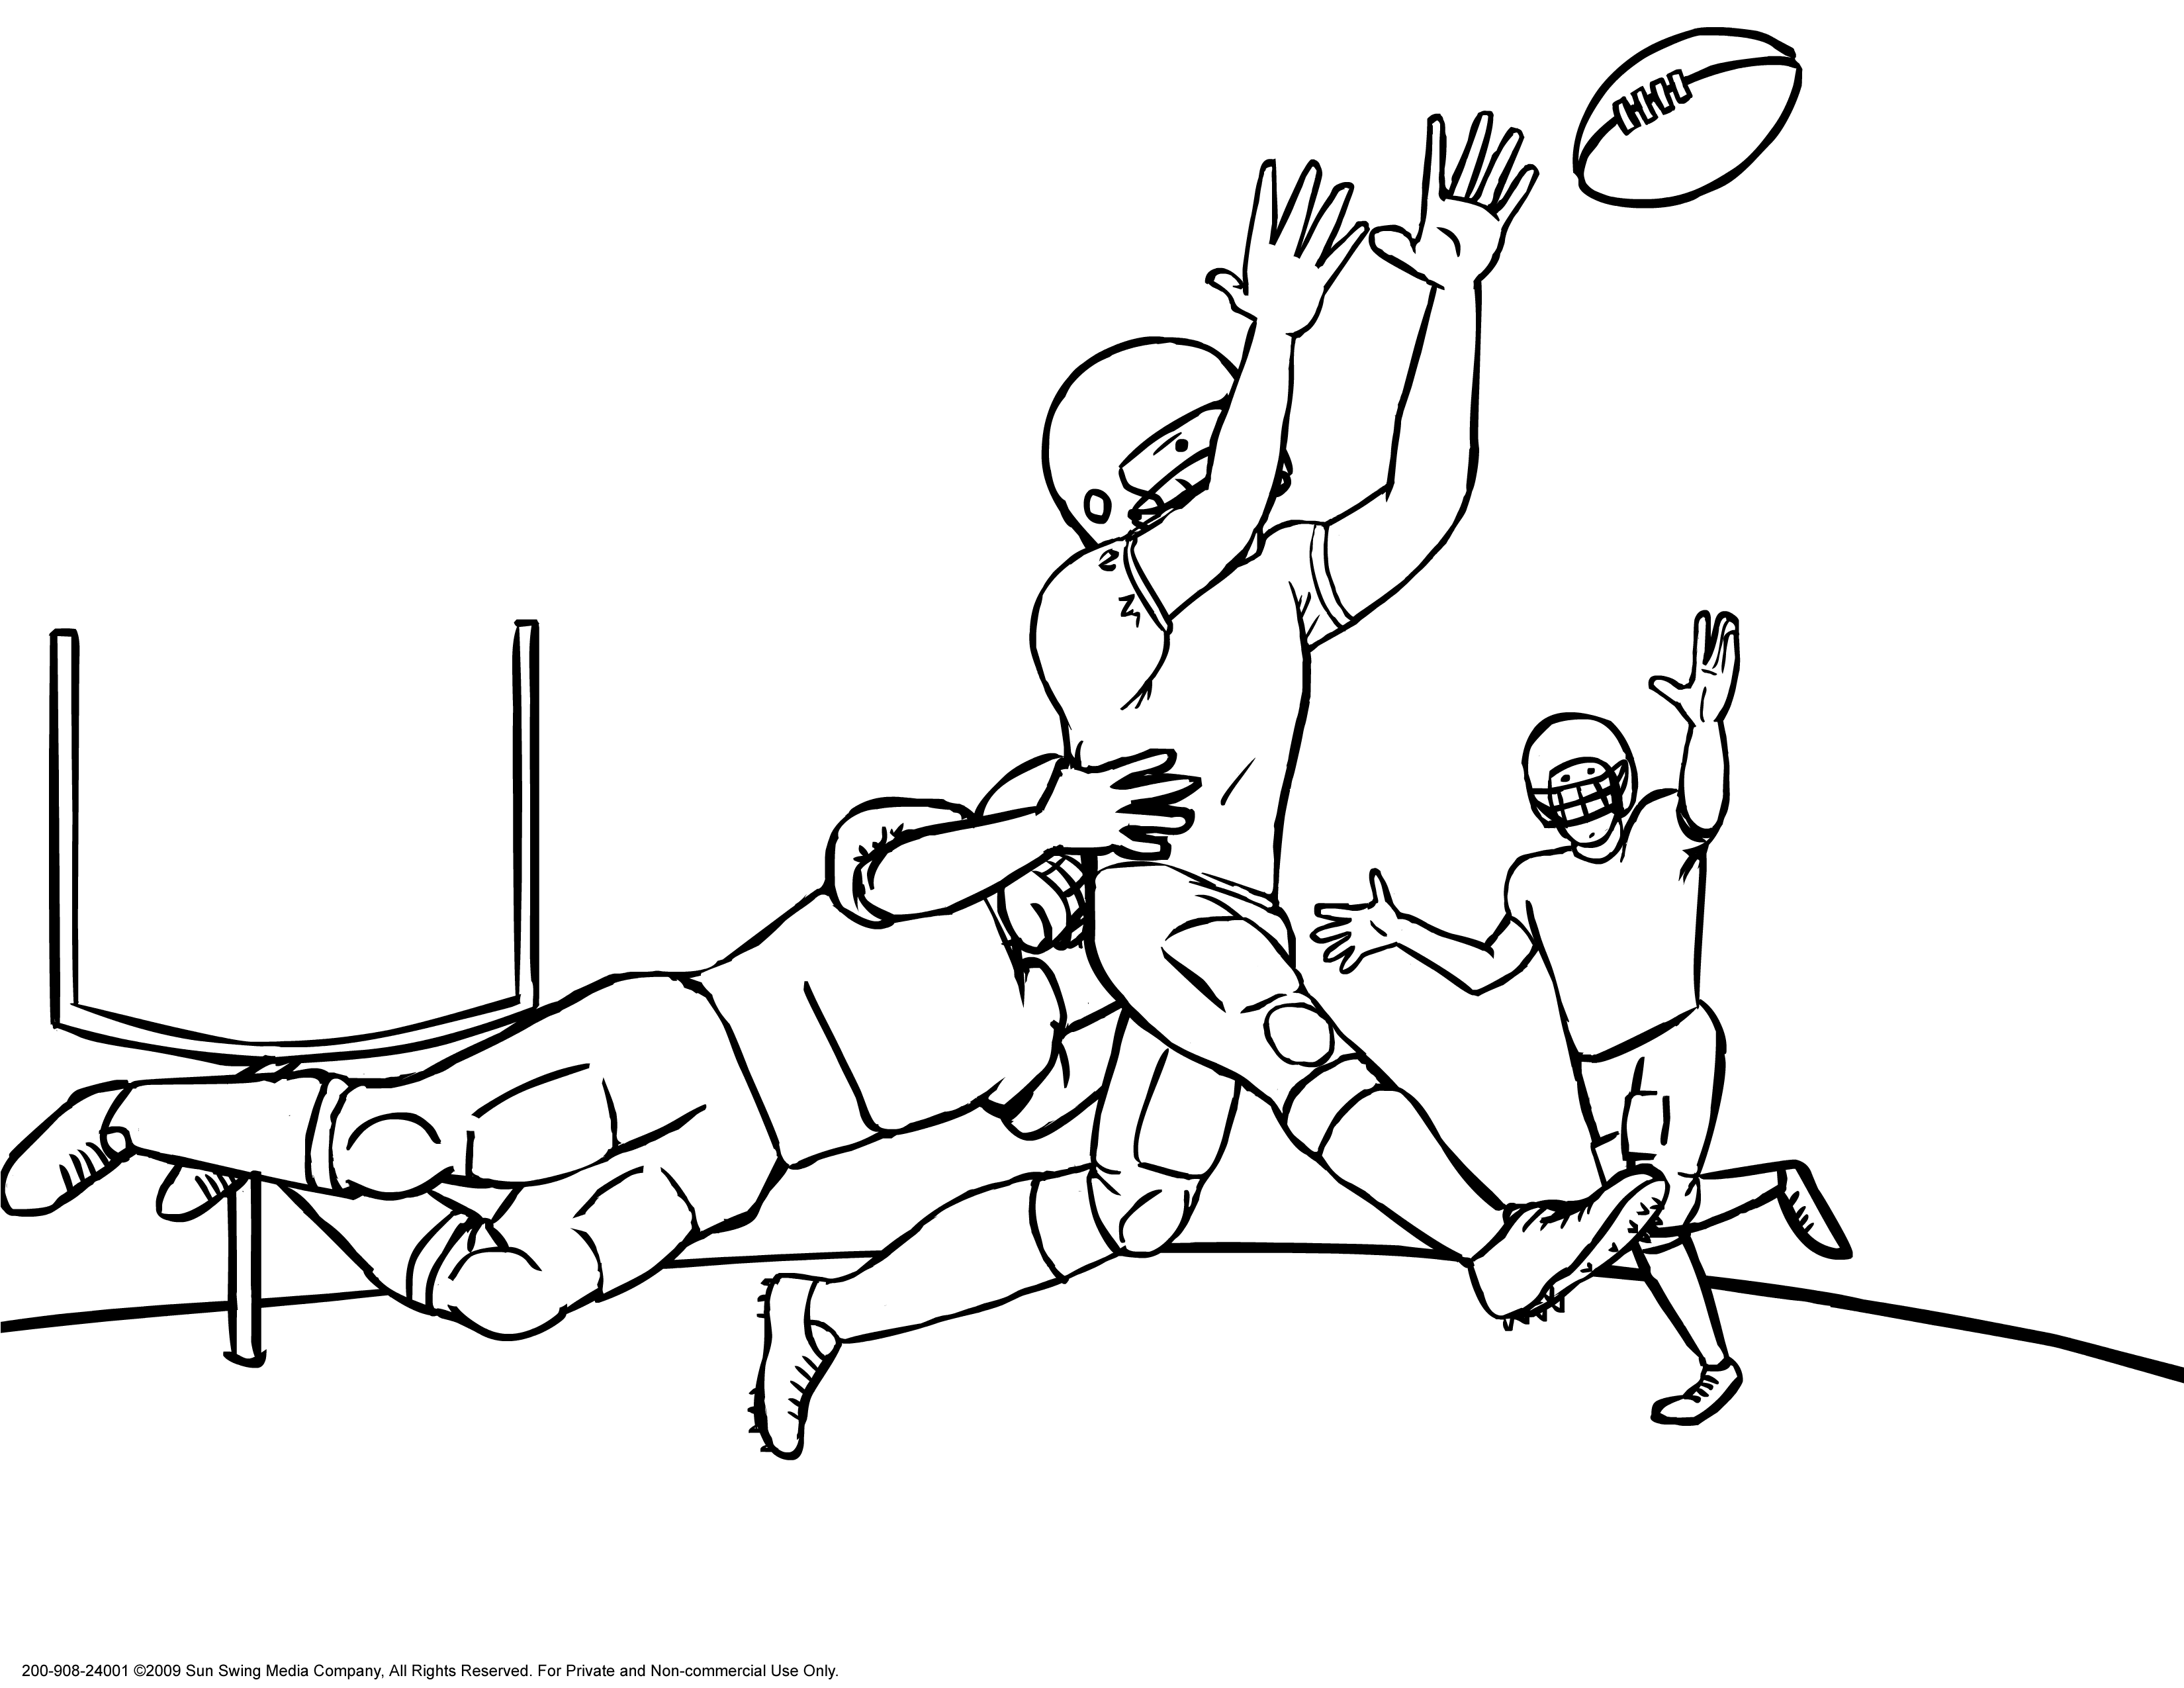 Jumping for the Football Coloring Page